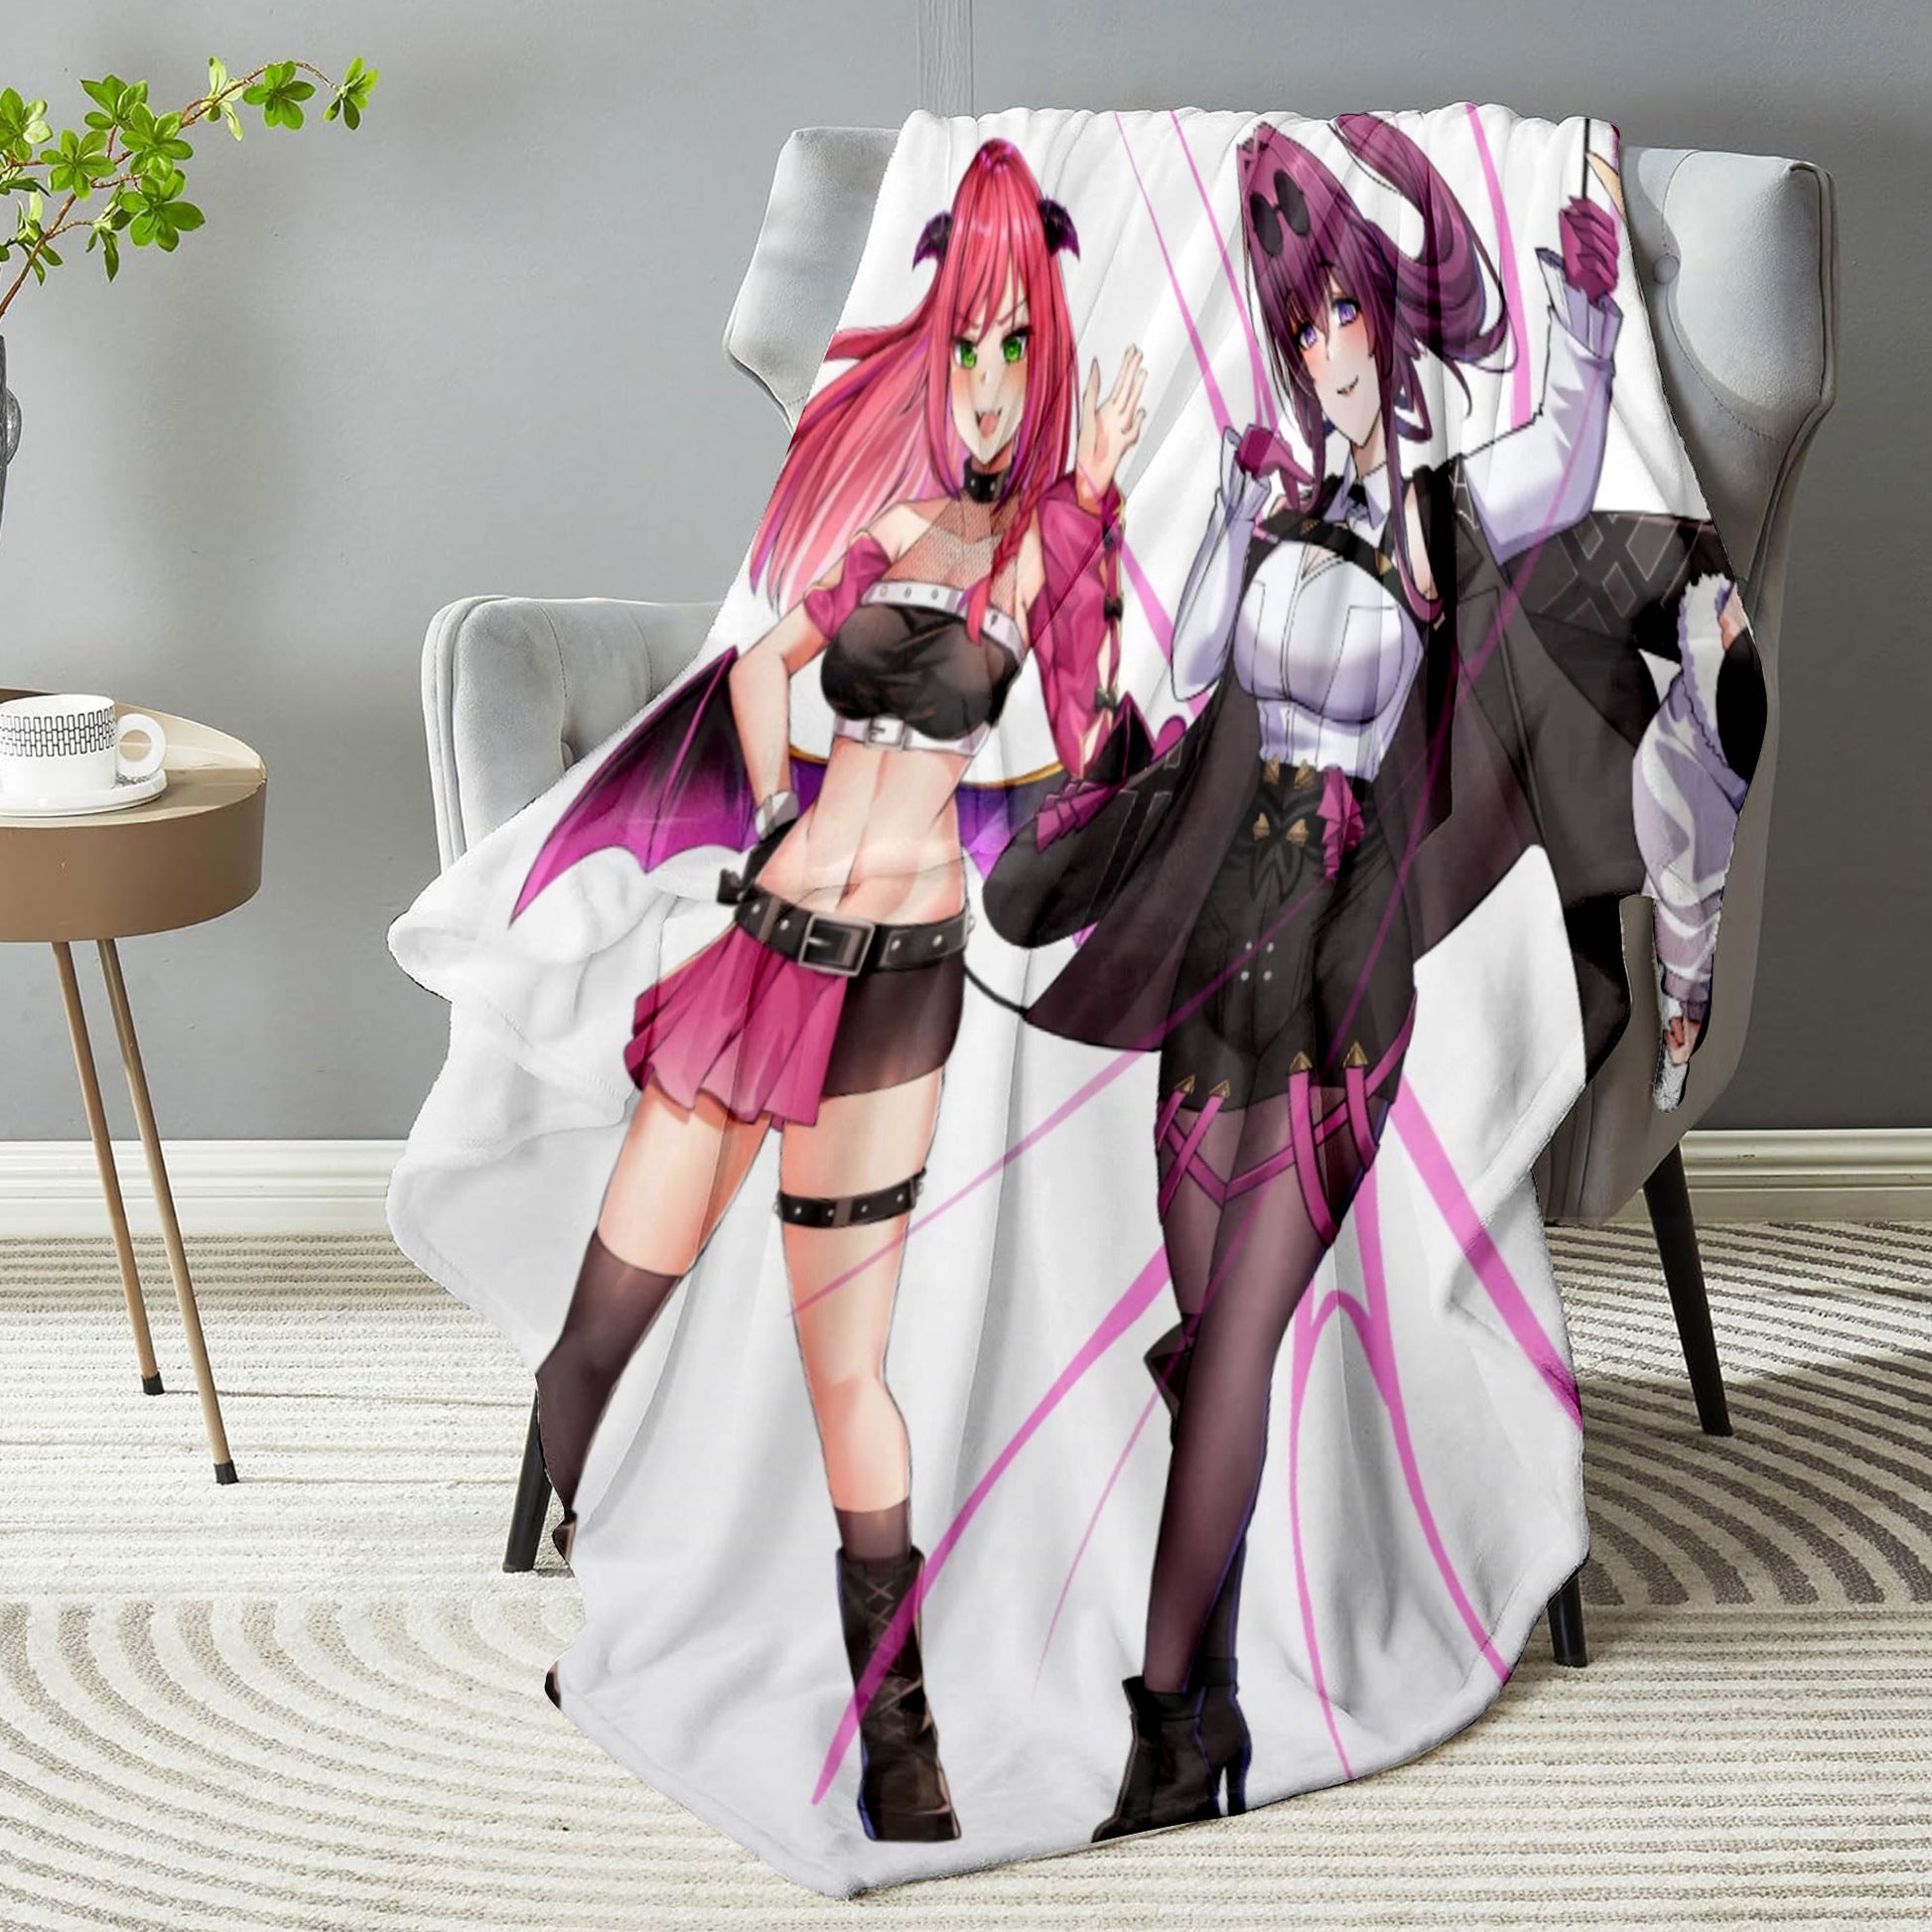 personalized blankets with photos turned to anime